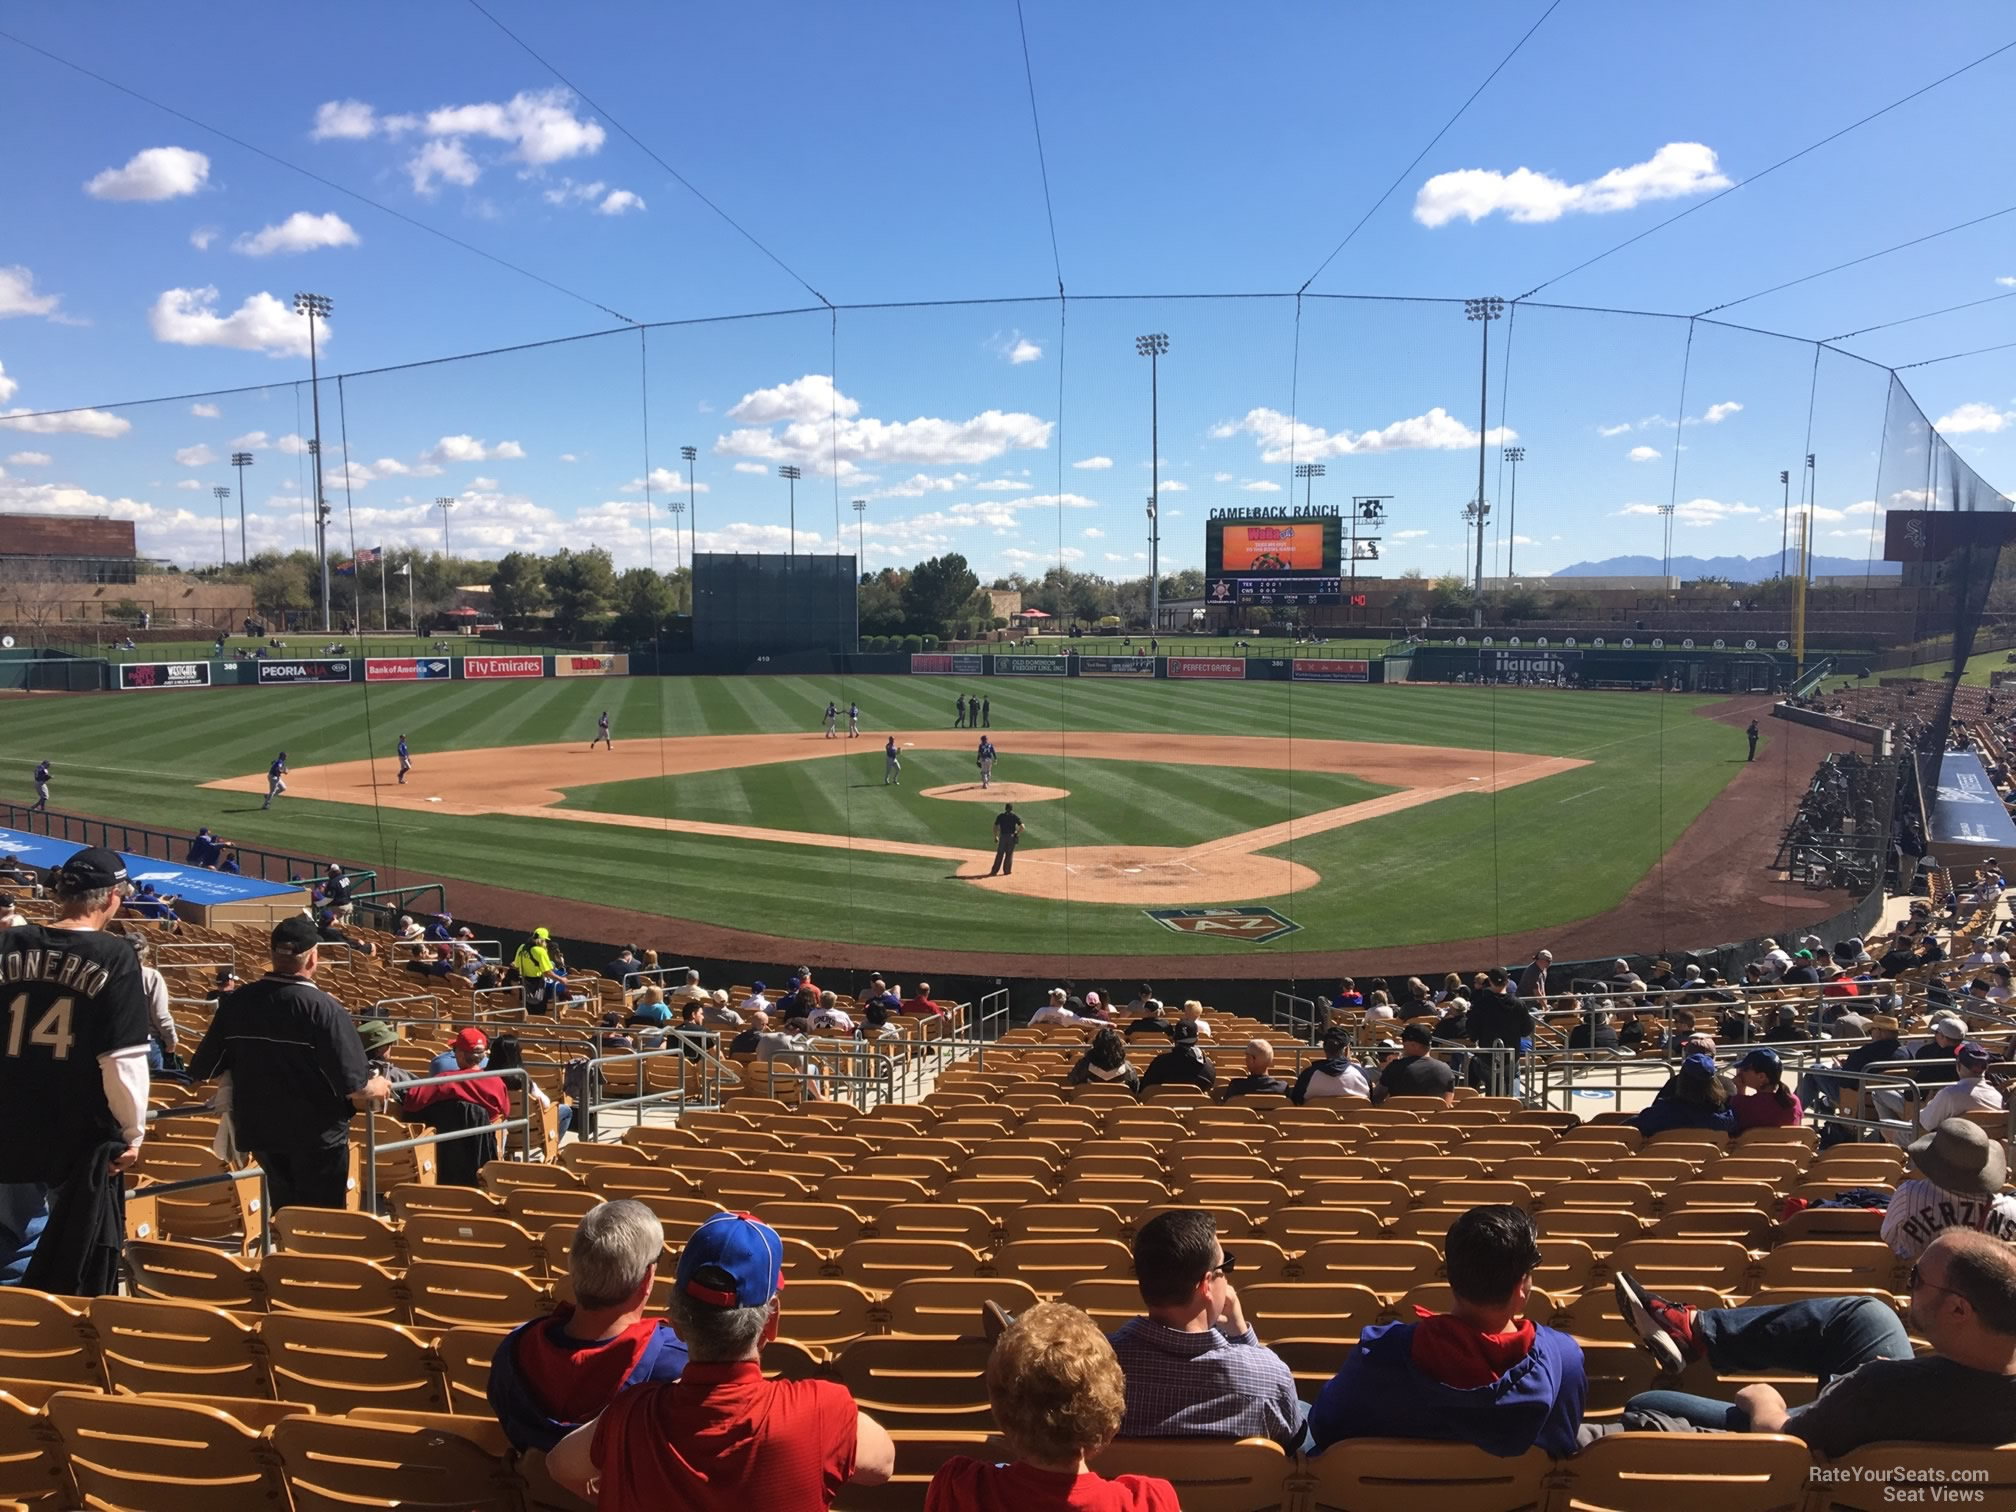 section 116, row 18 seat view  - camelback ranch